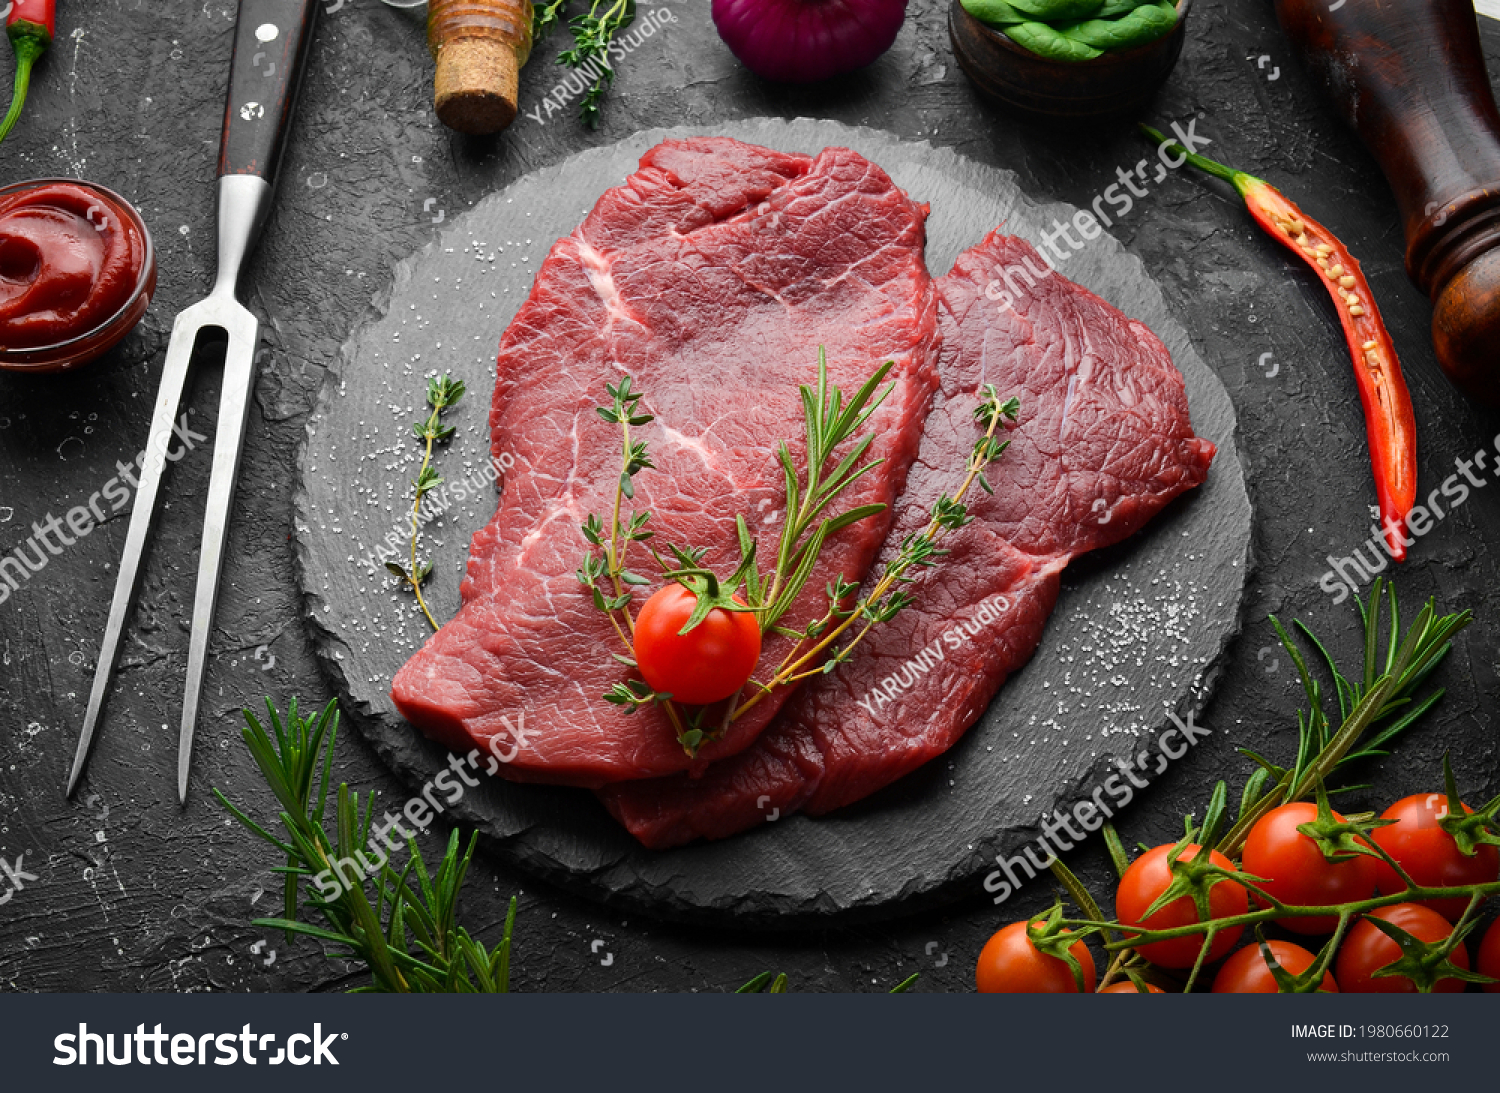 Meat. Raw veal steak with rosemary and spices. On a black stone background. Top view. #1980660122